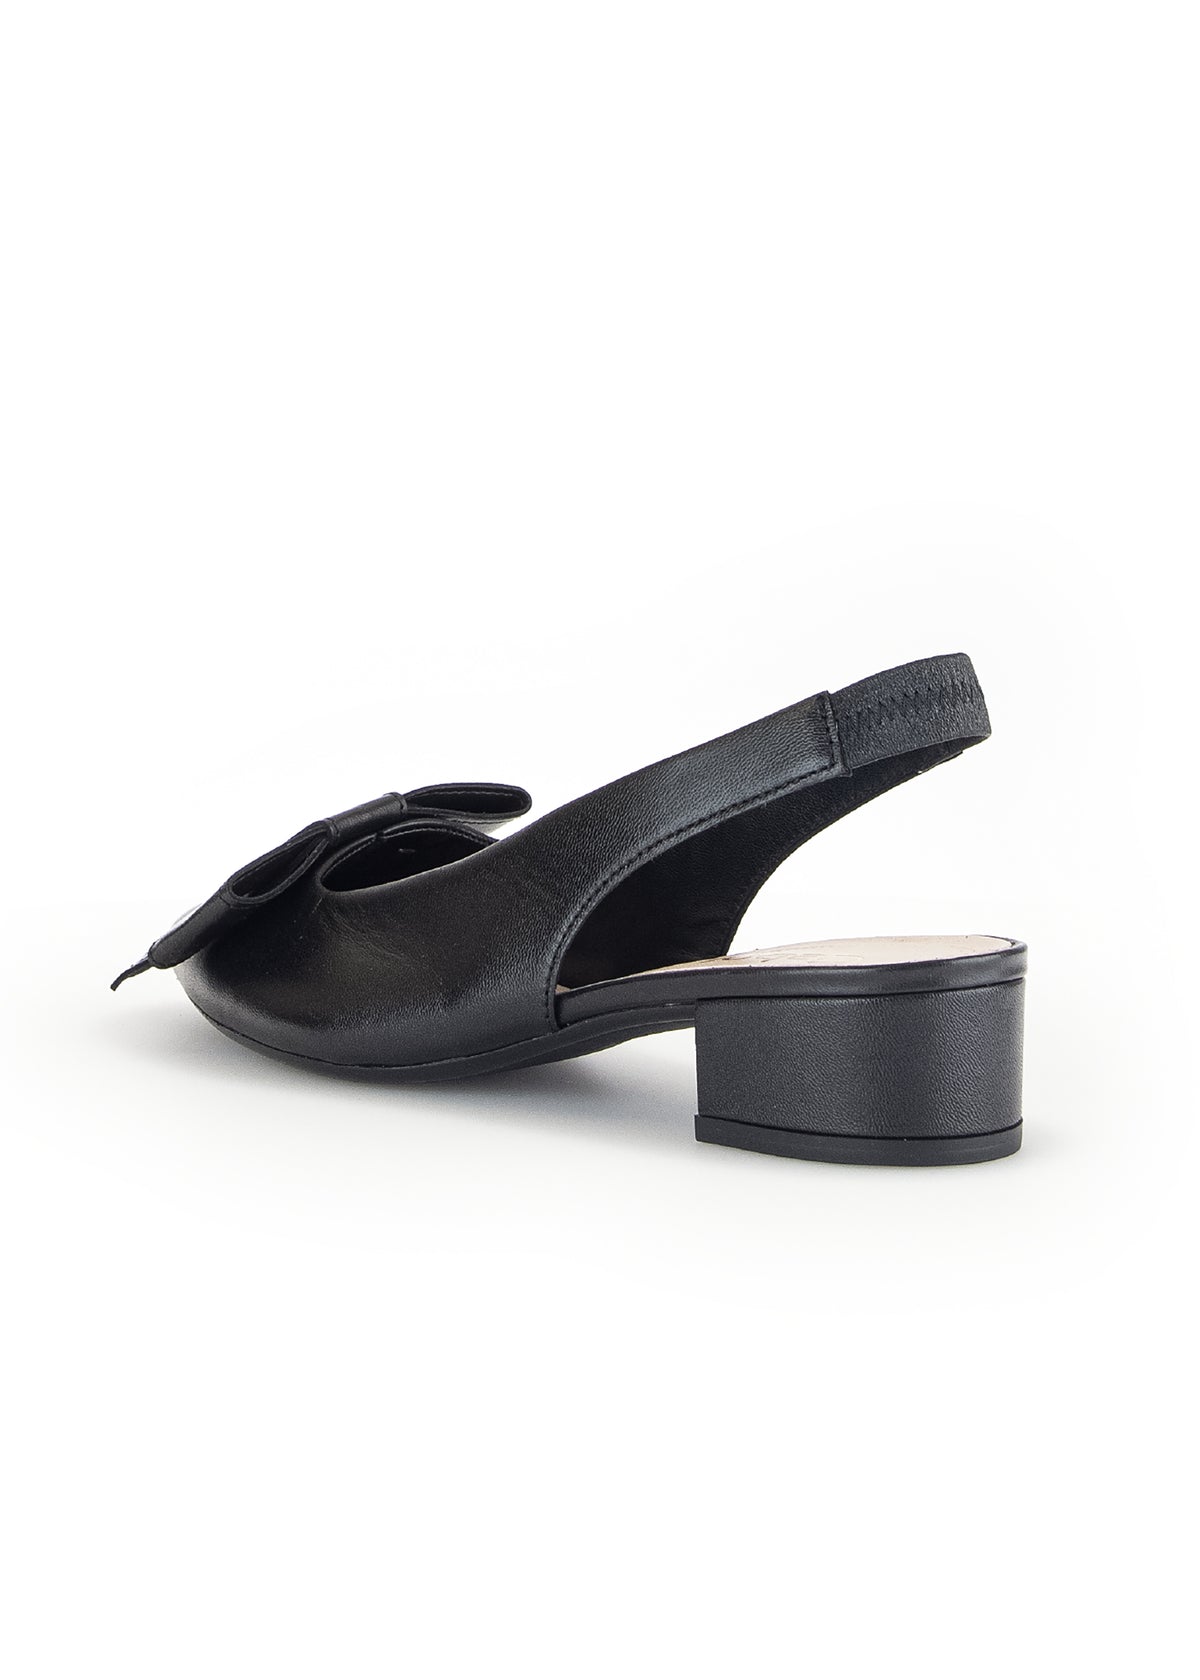 Slingback loafers - black leather, bow decoration